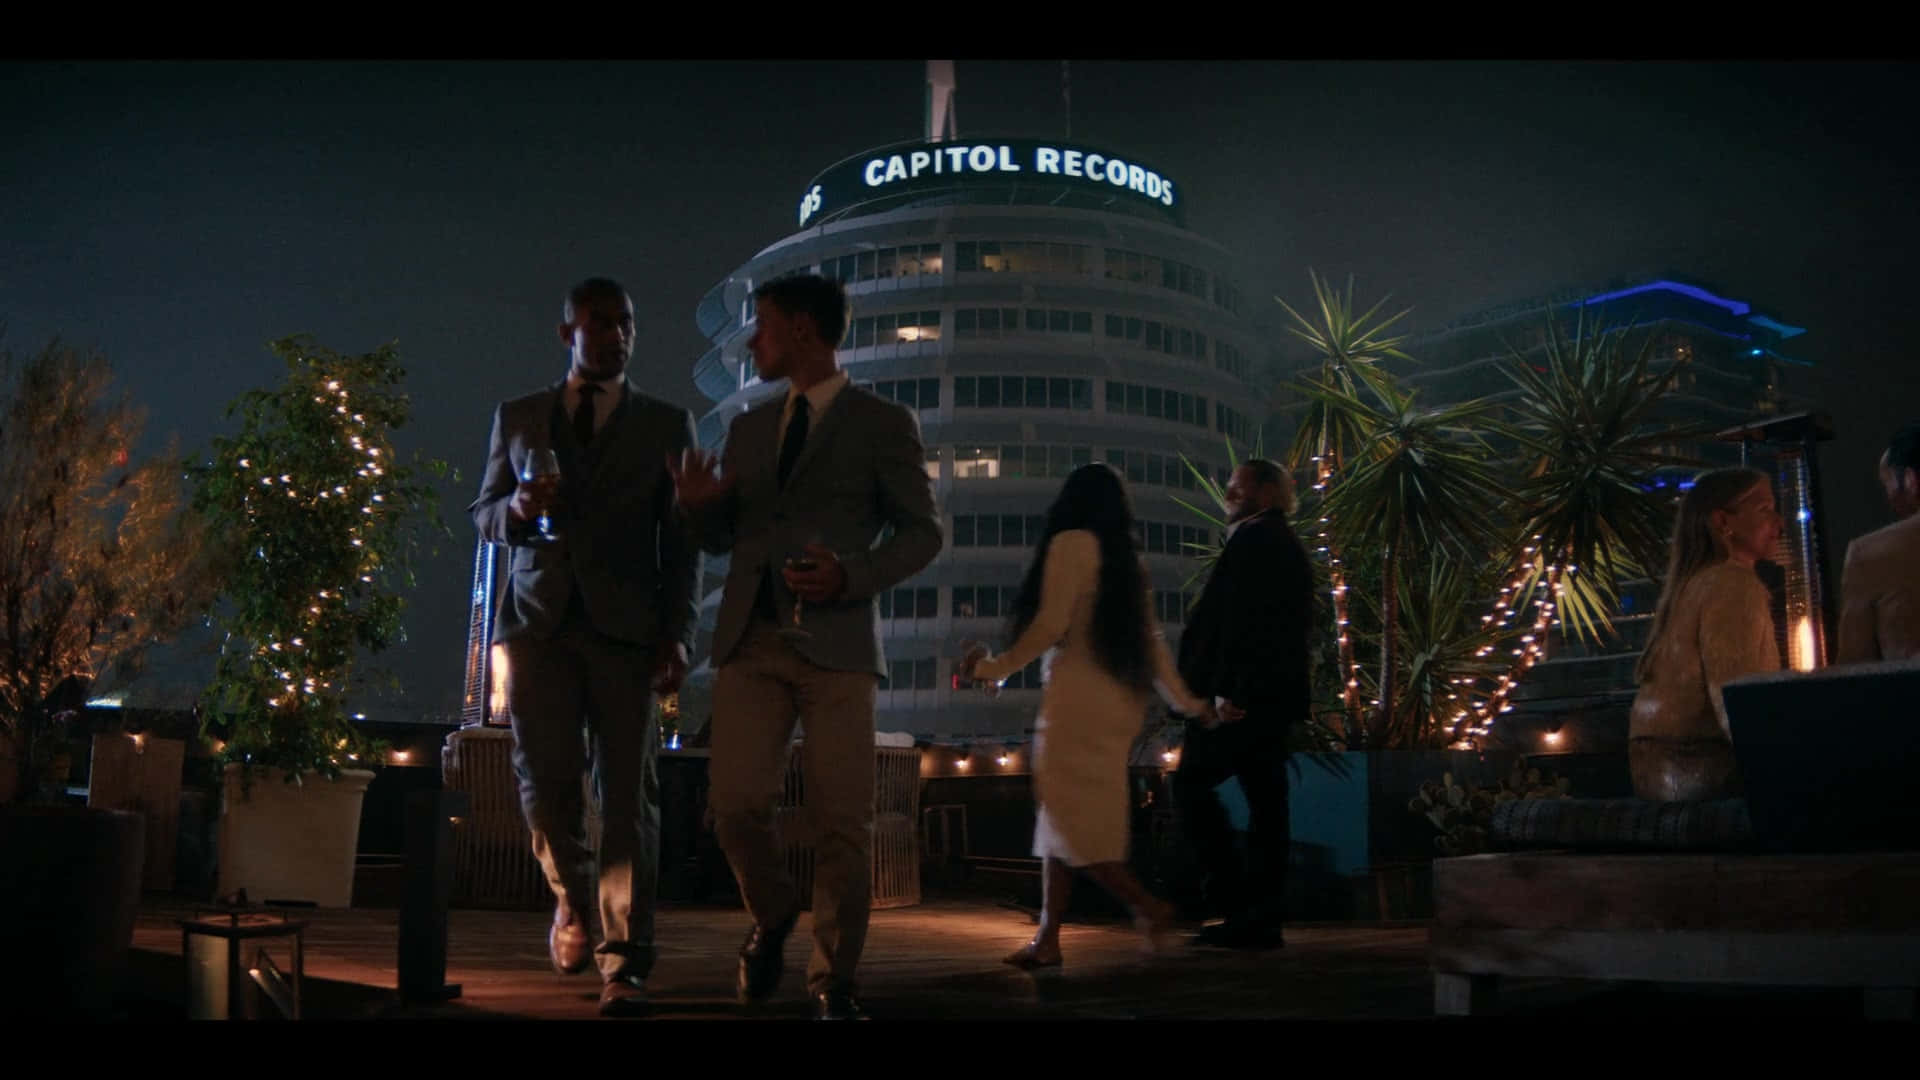 Formal People In Capitol Records Building Wallpaper